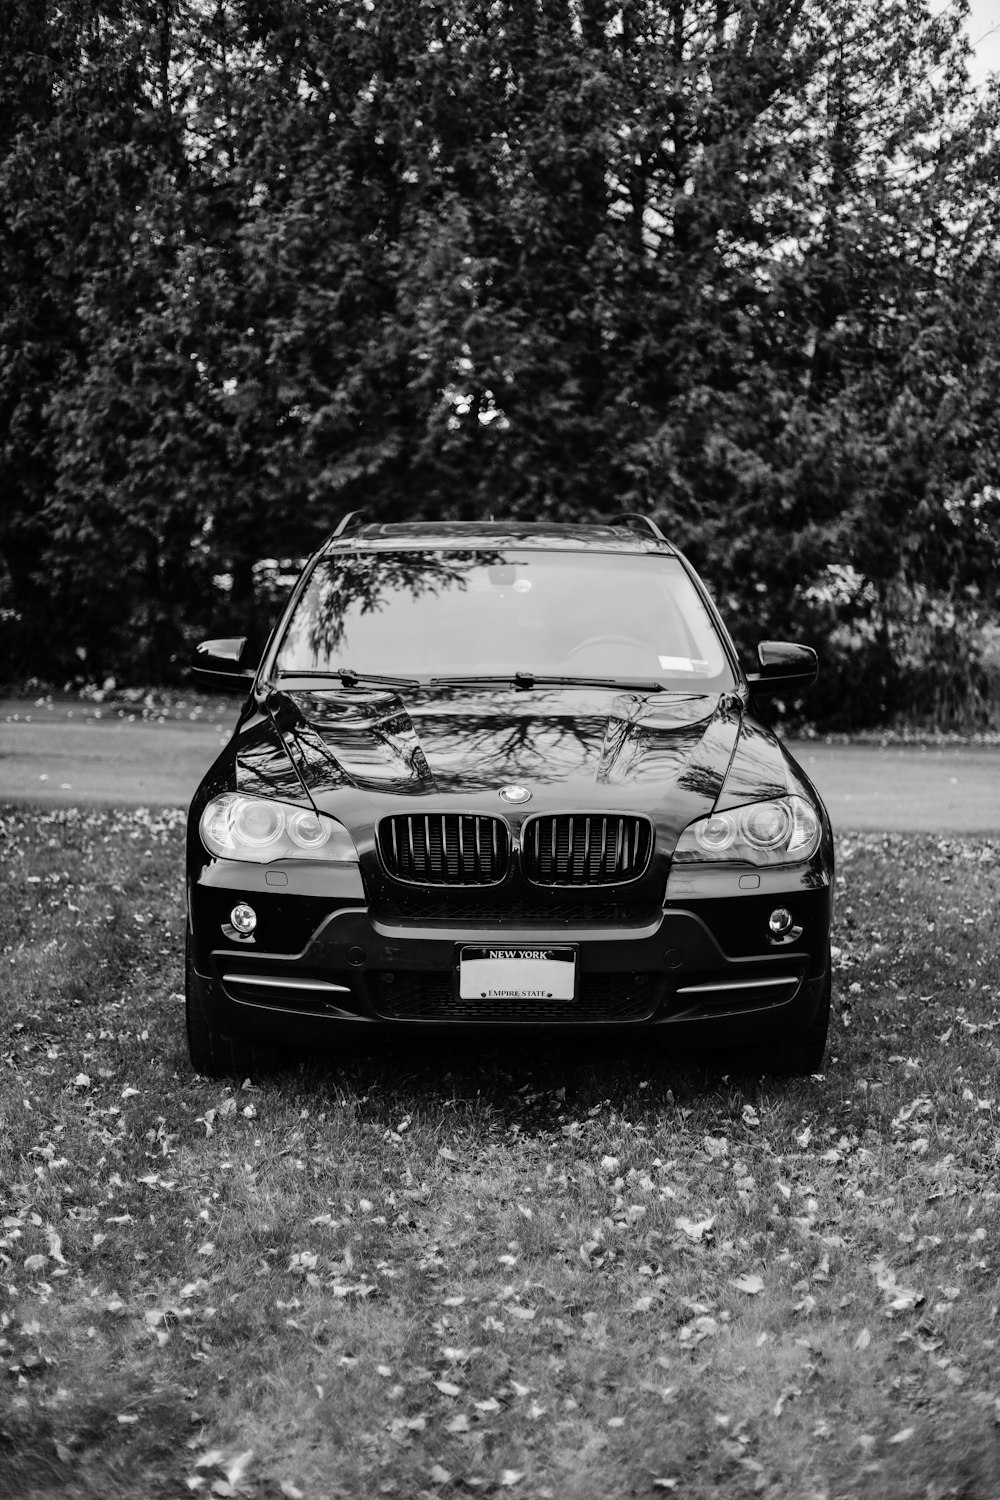 a black and white photo of a bmw